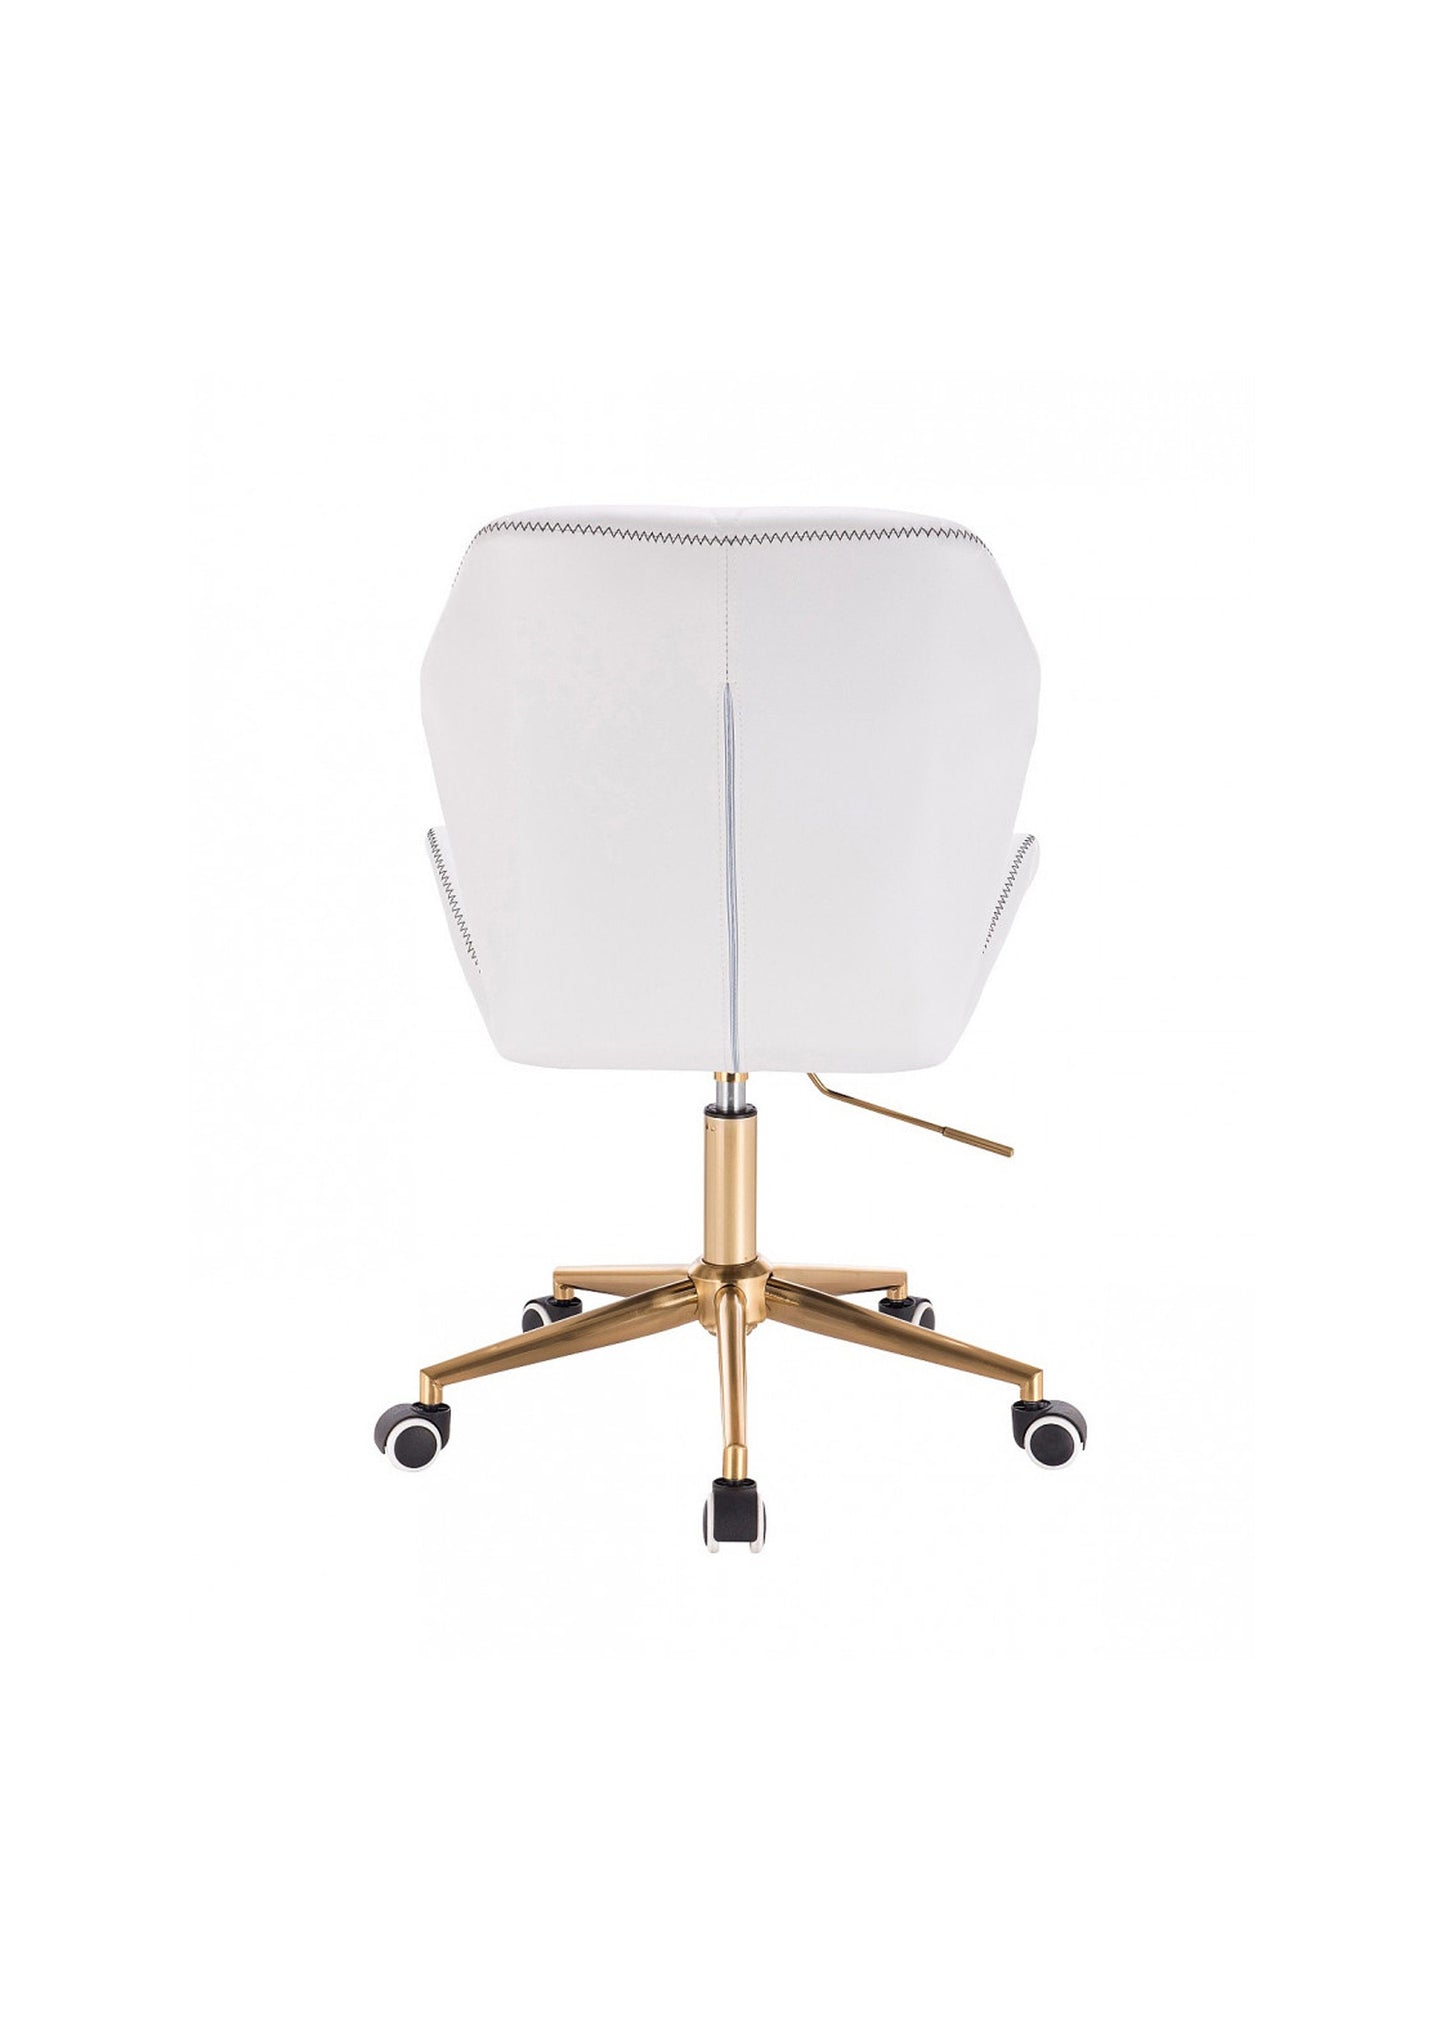 NEW Beautiful & stylish Faux Leather Designer adjustable swivel office/desk chair with gold base White ZigZag